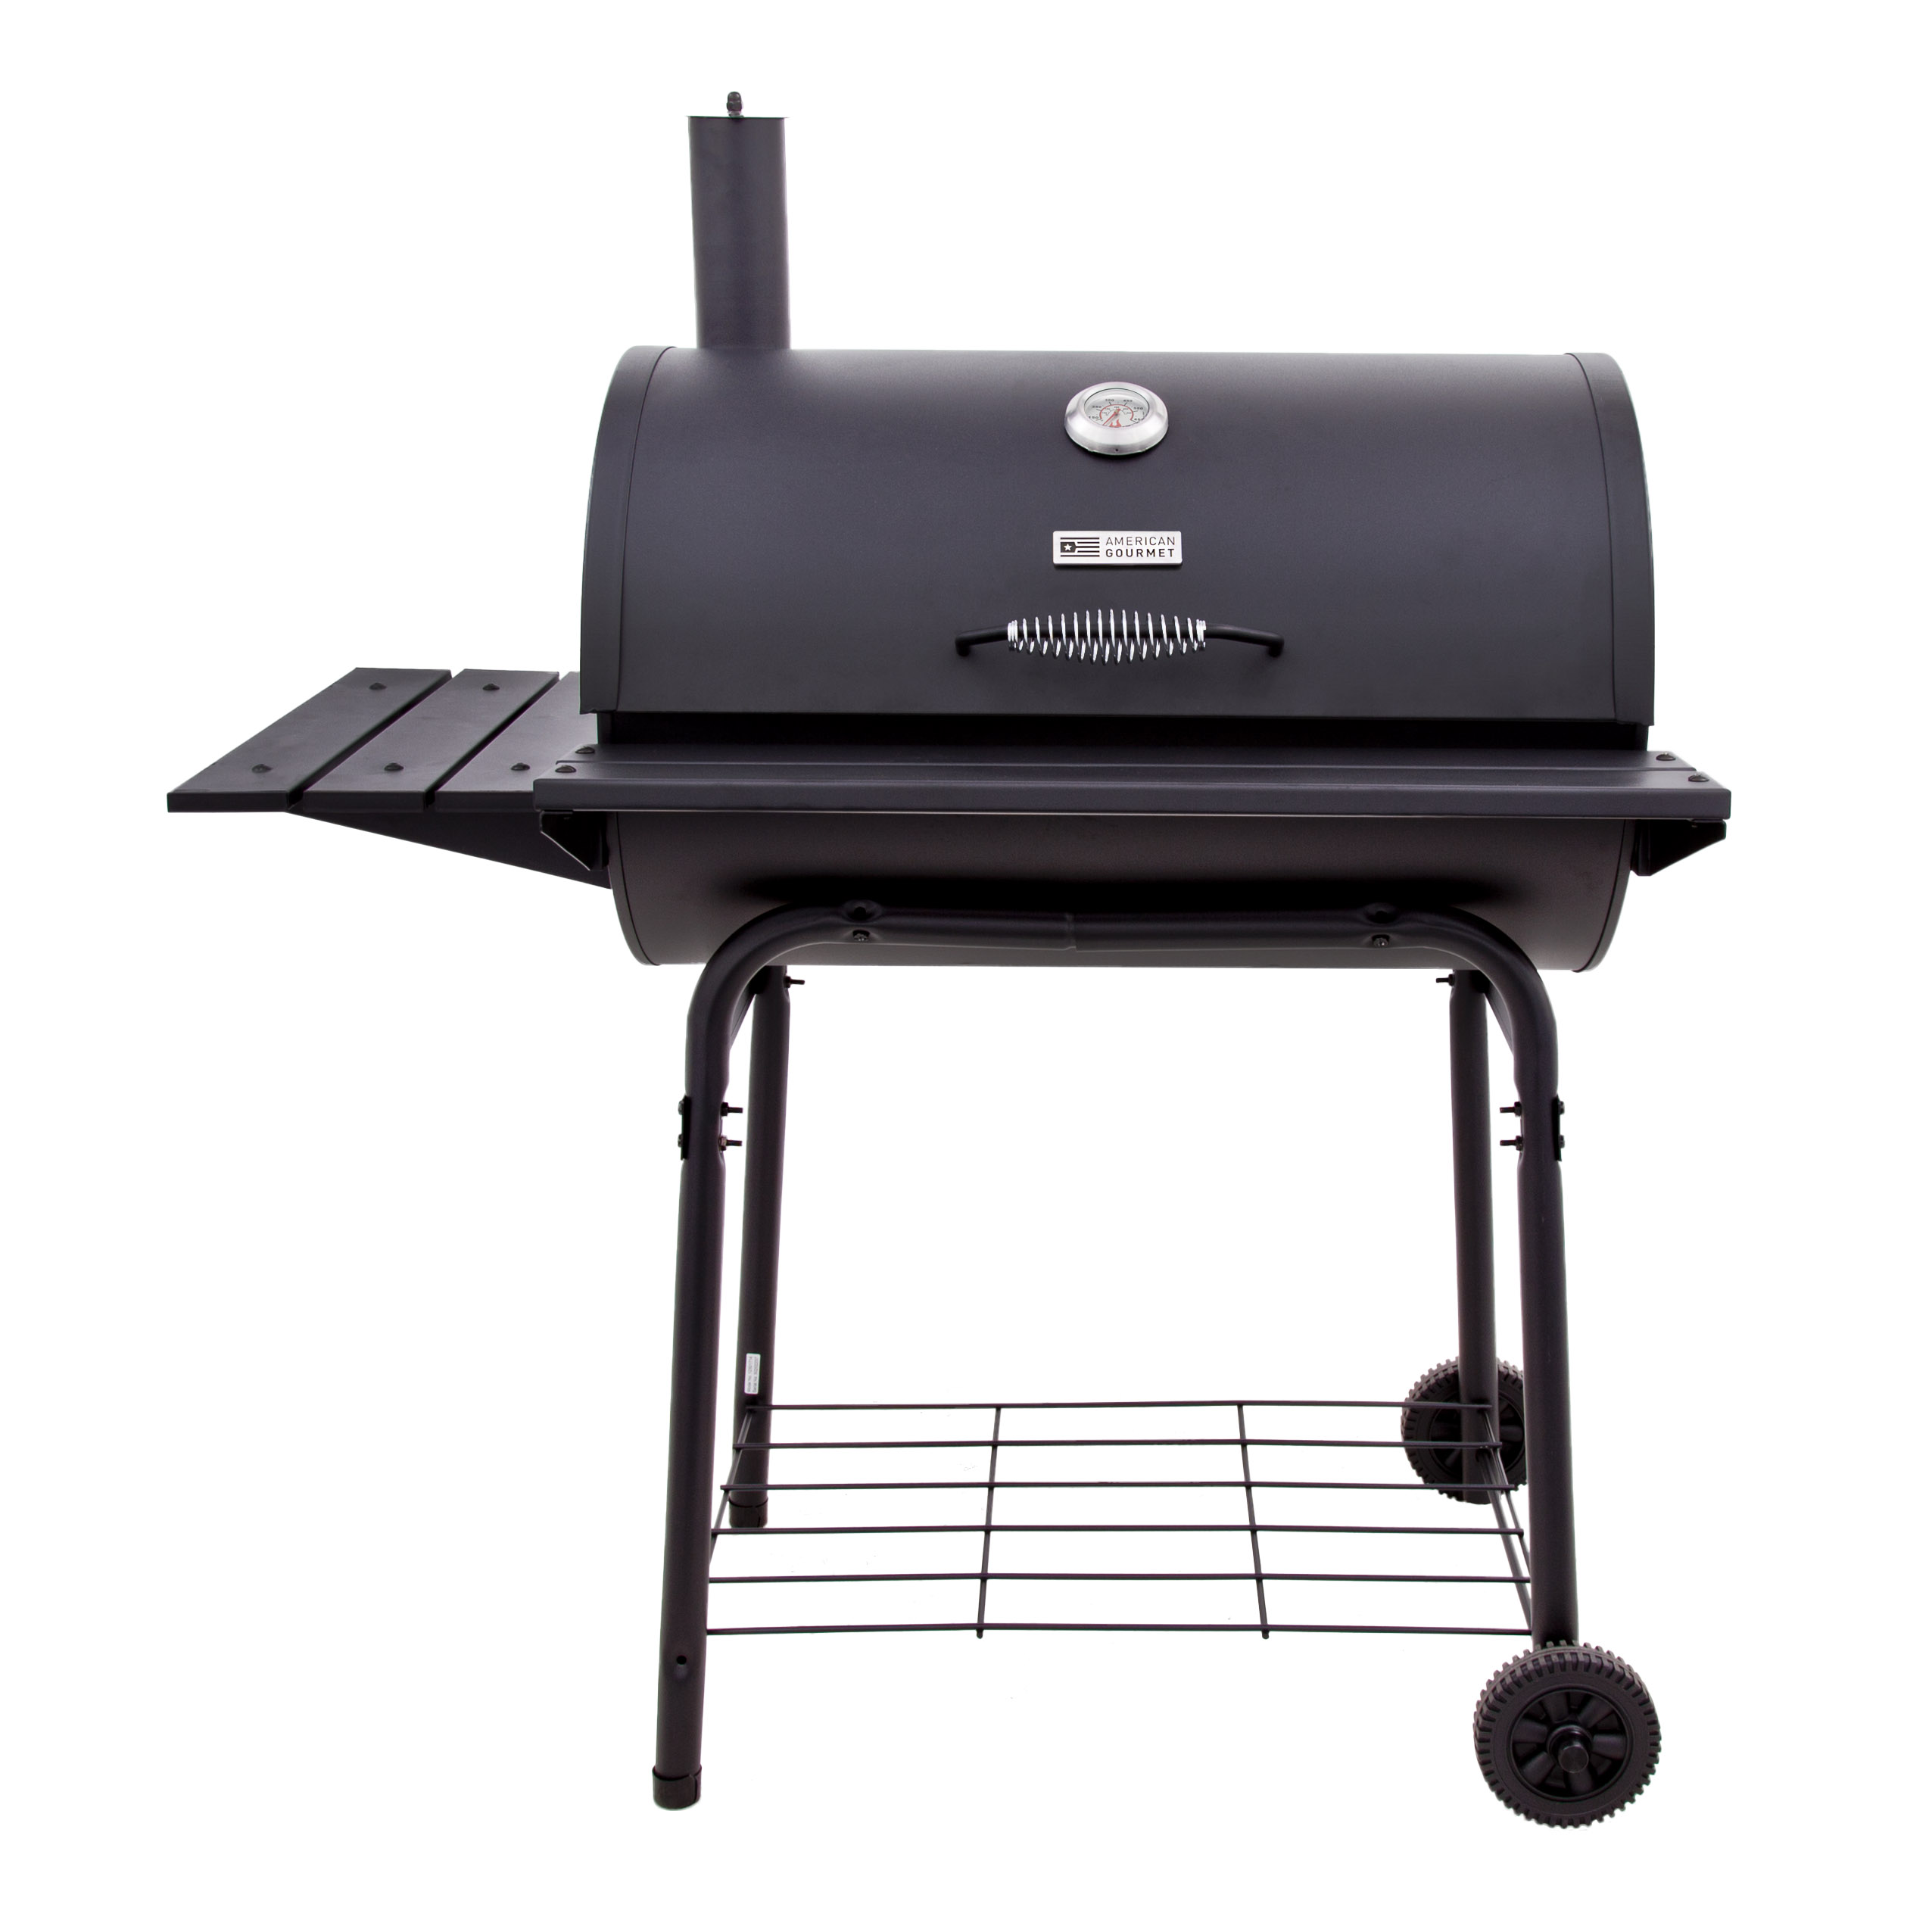 American Gourmet by Char-Broil 840 sq in Charcoal Barrel Outdoor Grill - image 1 of 9